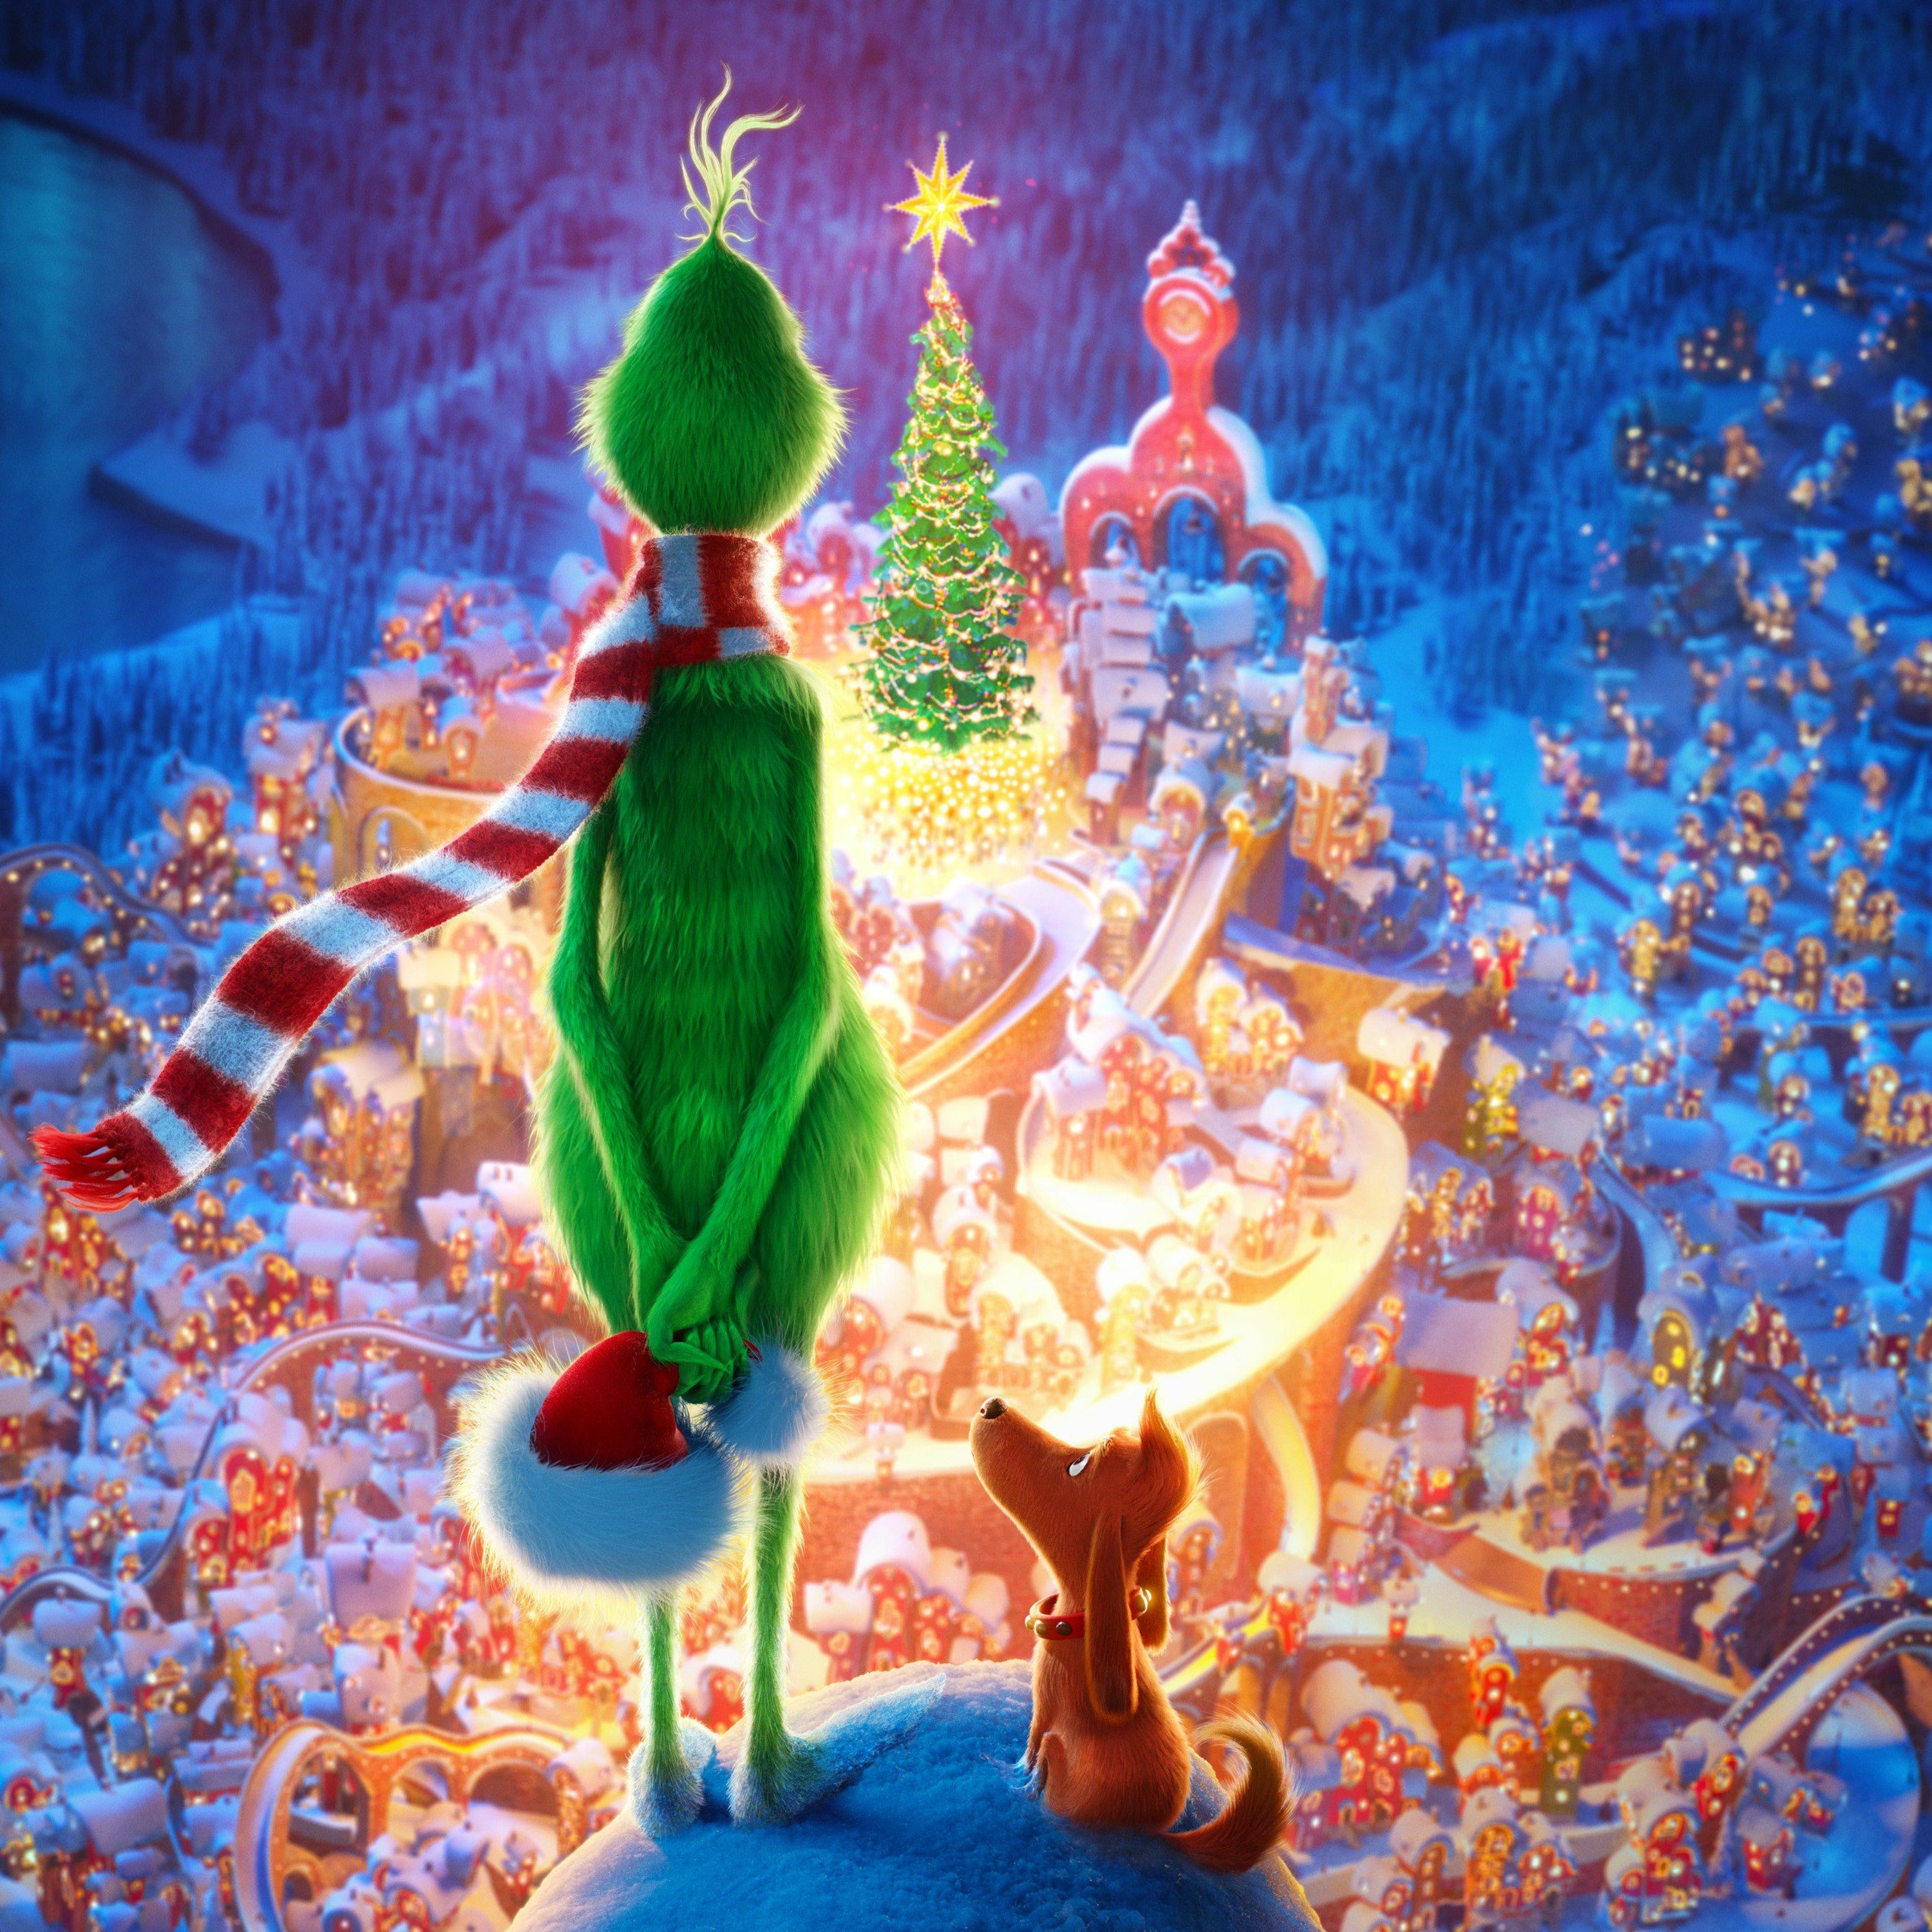 Fans About Films 30: The Grinch: Movie Review (with Samantha Walker)(English)